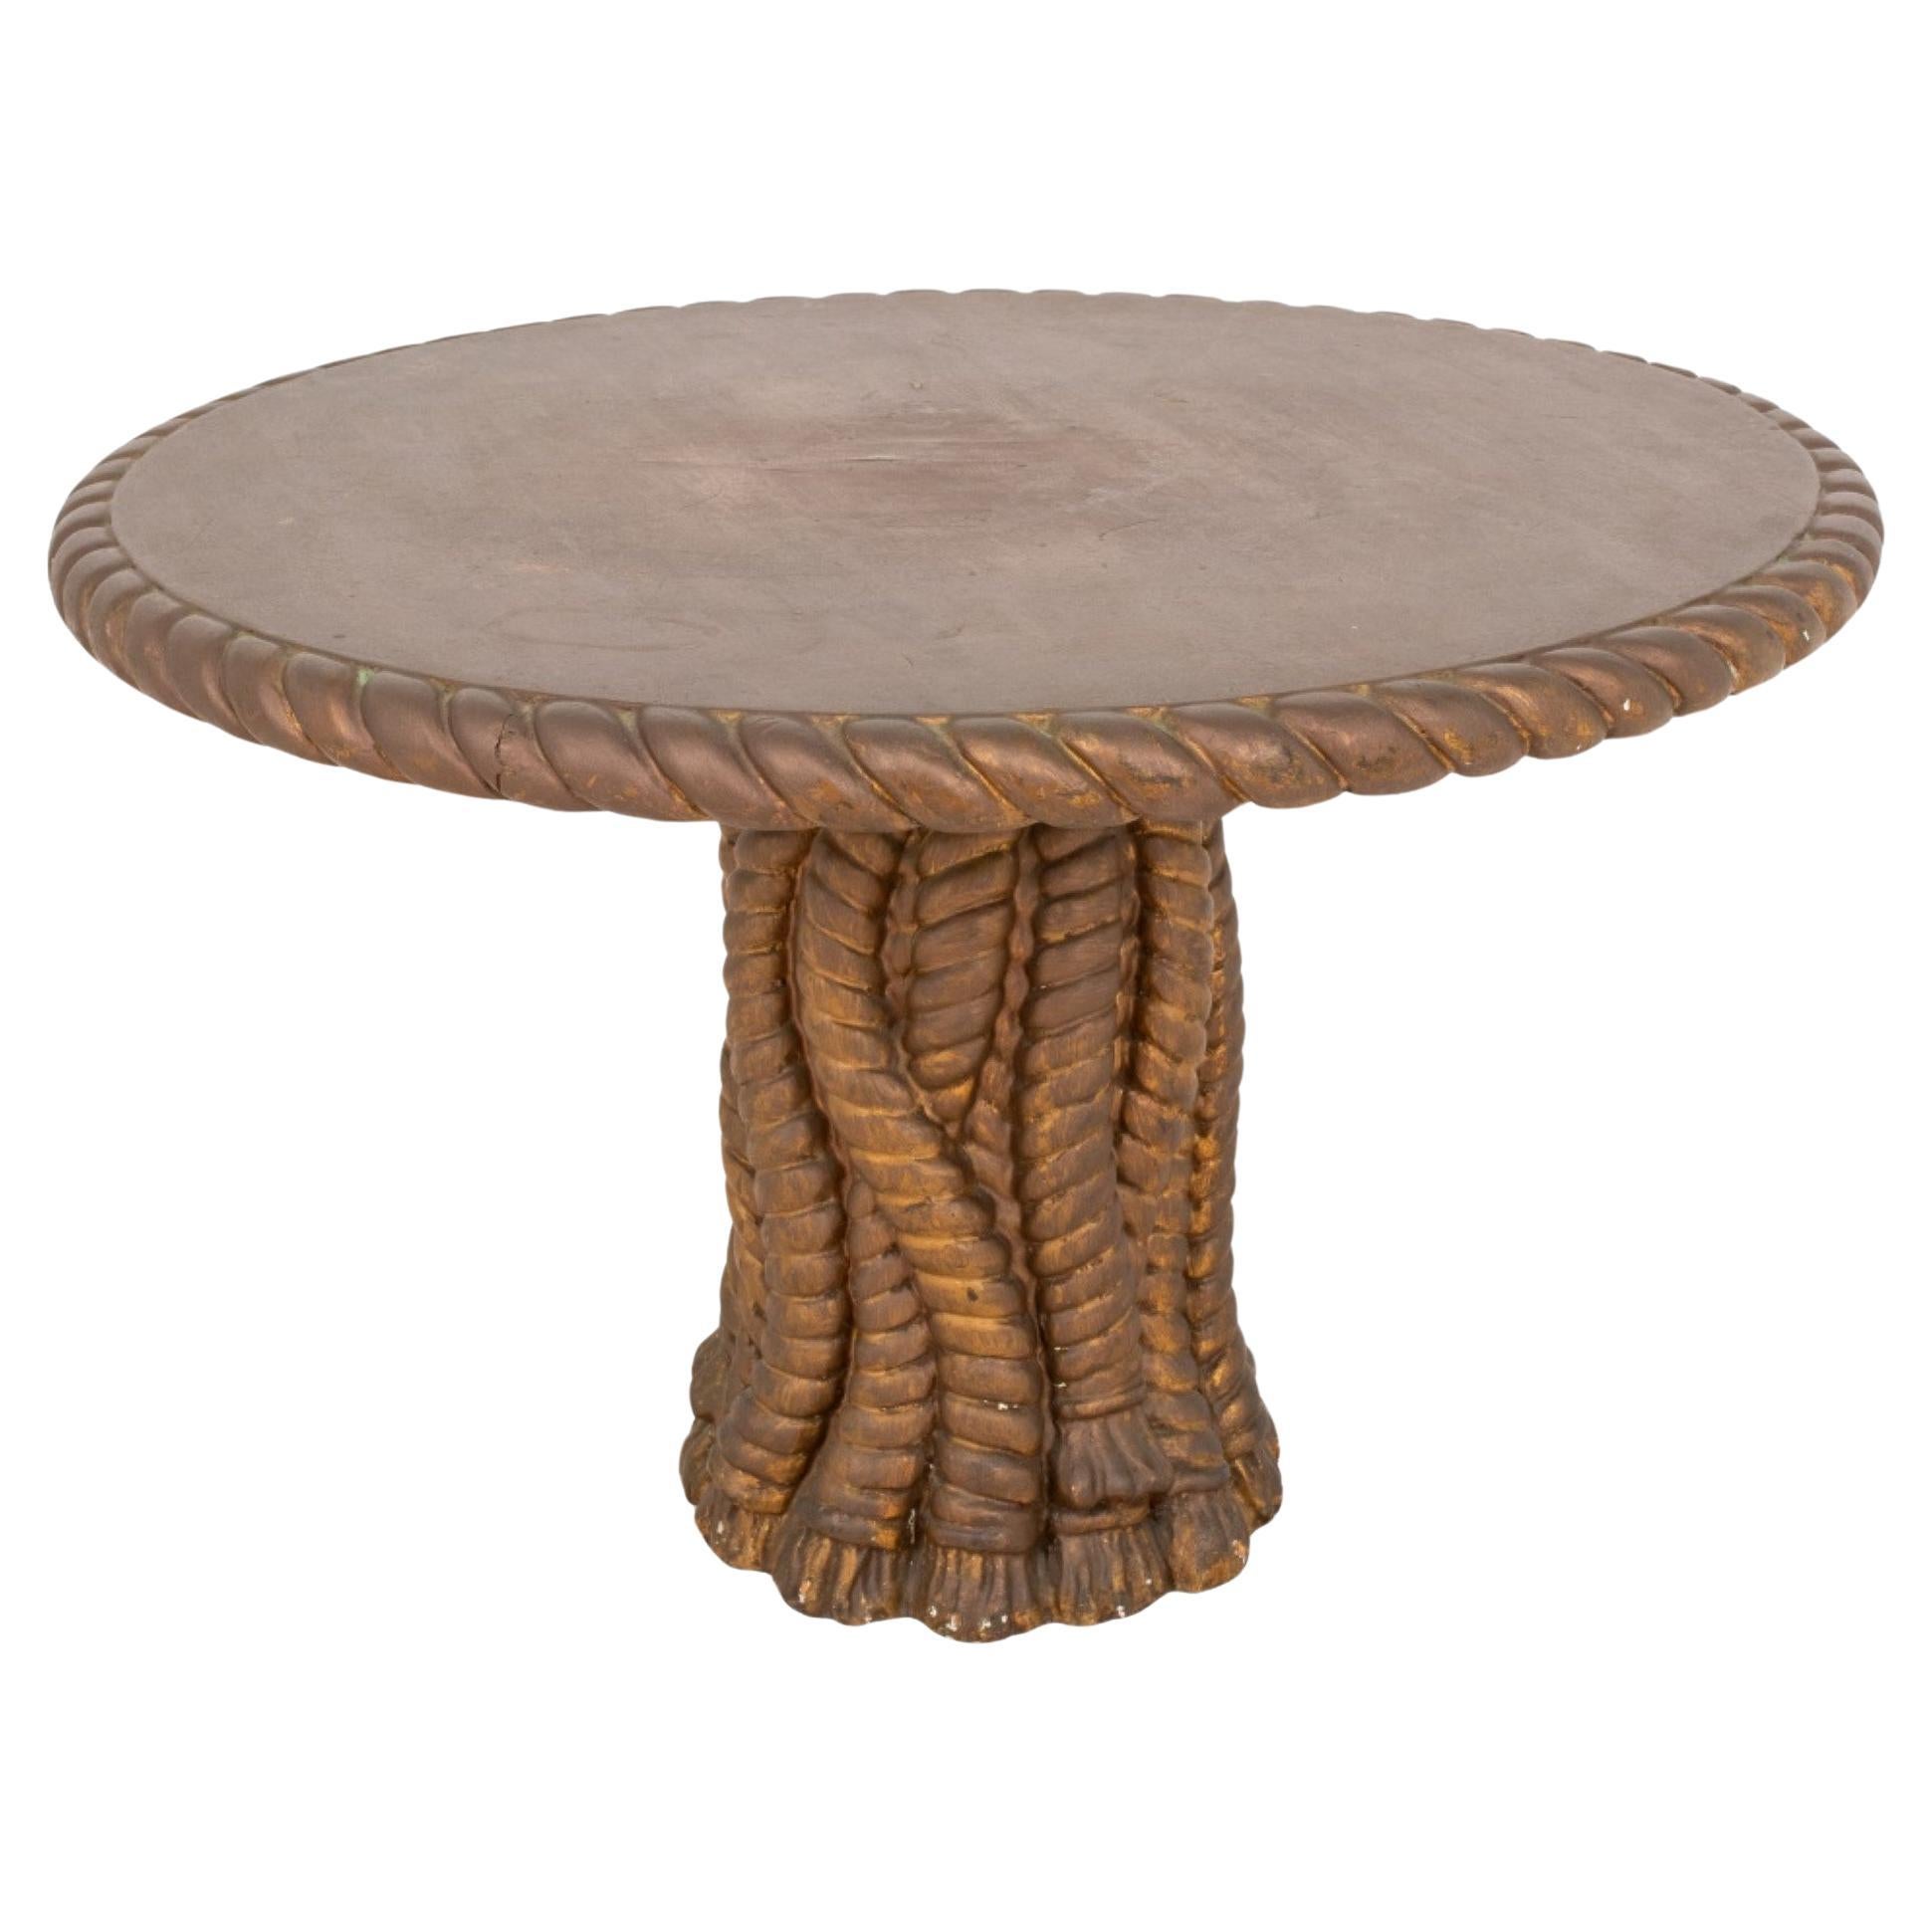 Dorothy Draper Style Rope and Tassel Table For Sale